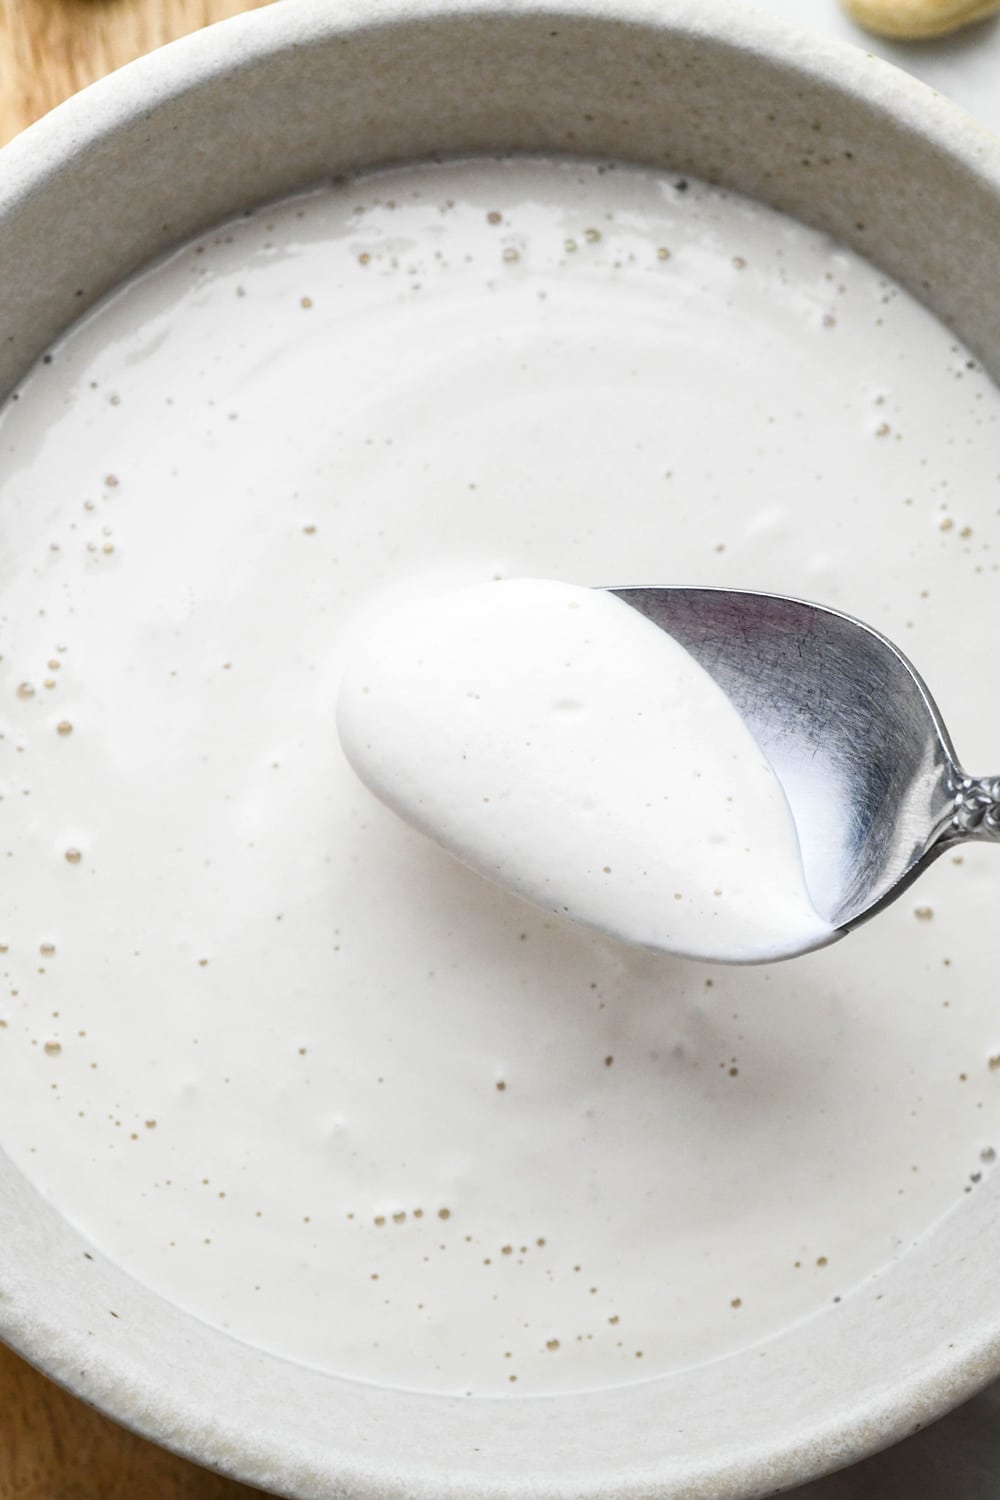 A spoon lifting out a bit of cashew cream made with 3/4 cup water to show the thinner consistency.